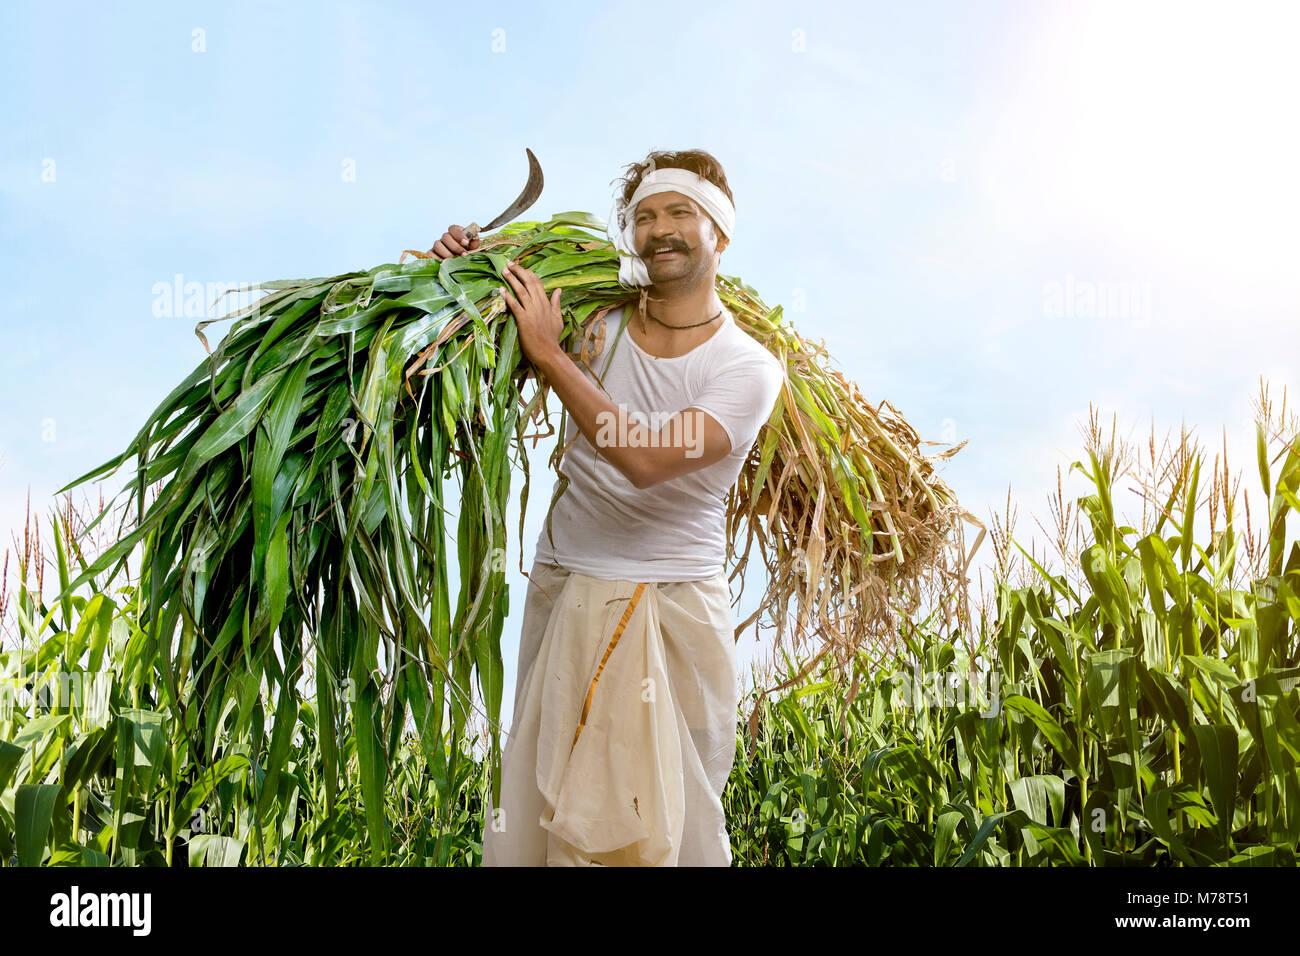 Farmer holding sickle and crops Stock Photo